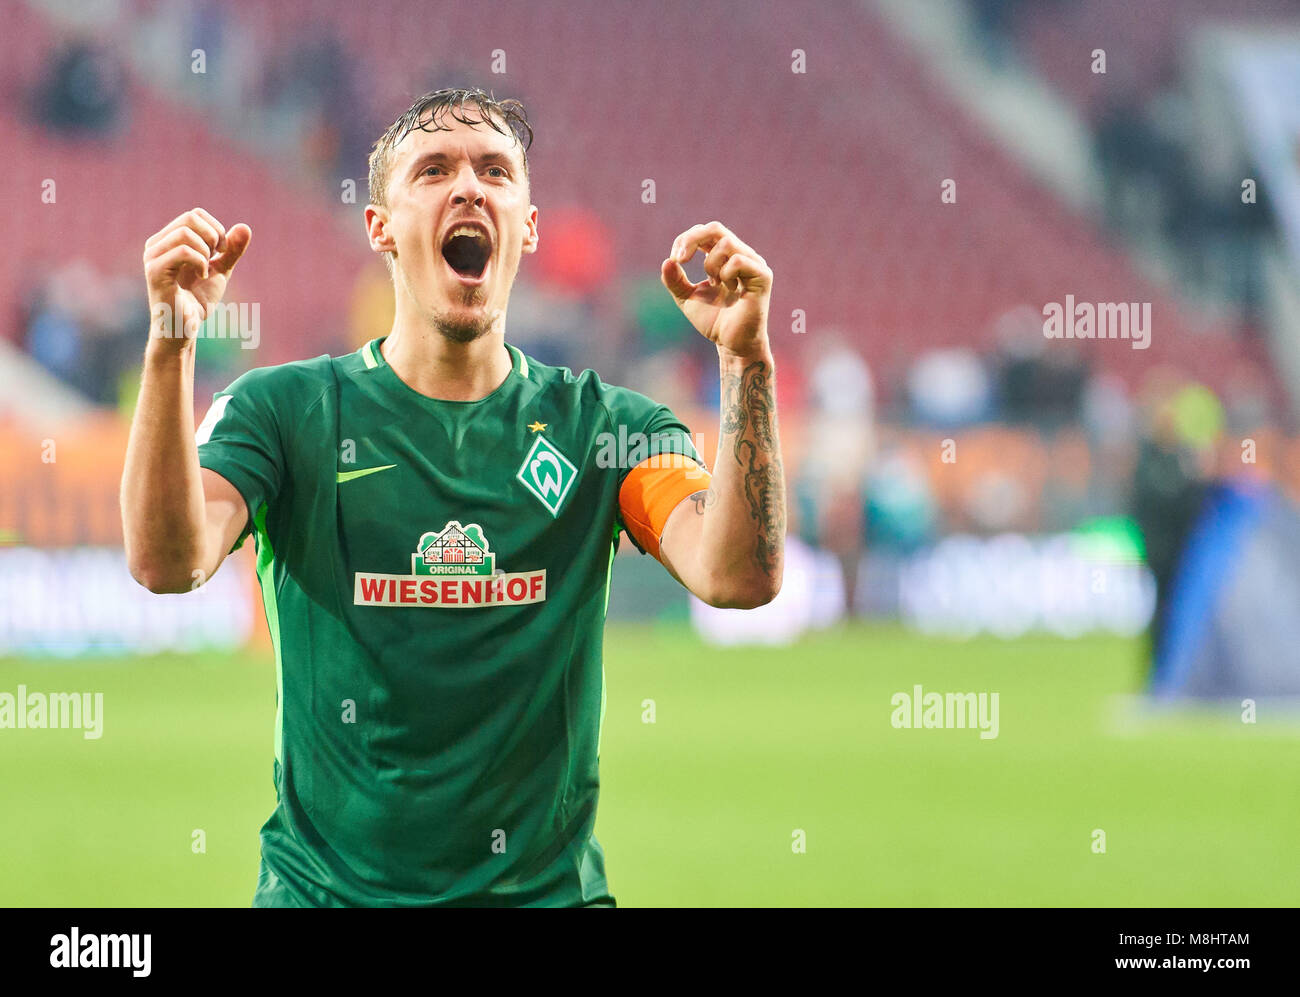 FC Augsburg Soccer, Augsburg, March 17, 2018 Max KRUSE, BRE 10   celebrates Cheering, joy, emotions, celebrating, laughing, cheering, rejoice, tearing up the arms, clenching the fist,  FC AUGSBURG - SV WERDER BREMEN 1-3 1.German Soccer League, matchday 27 , Augsburg, March 17, 2018,  Season 2017/2018 © Peter Schatz / Alamy Live News Stock Photo